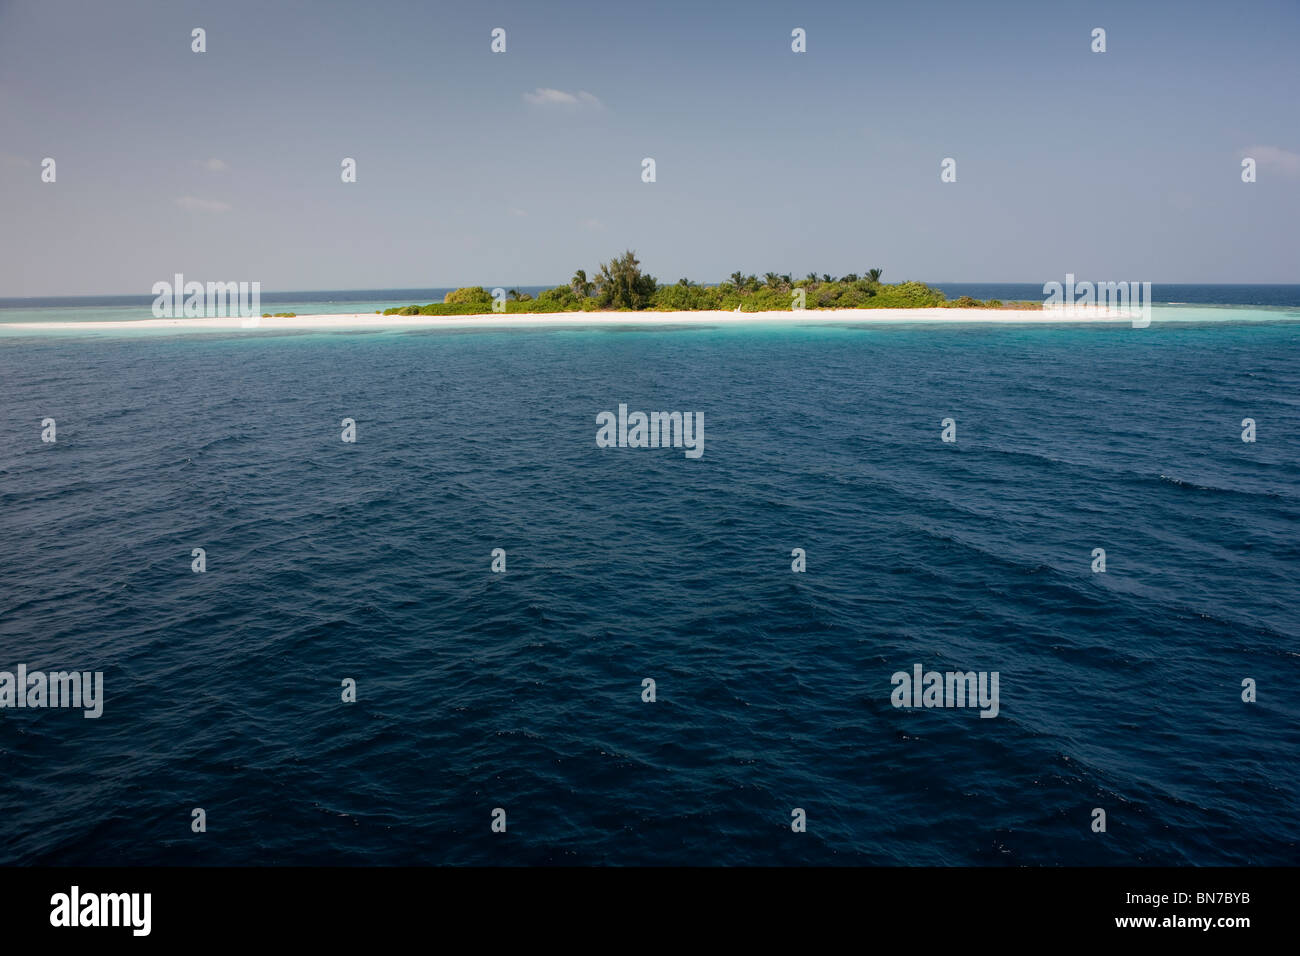 Remote atoll in the Maldives chain, Indian Ocean Stock Photo